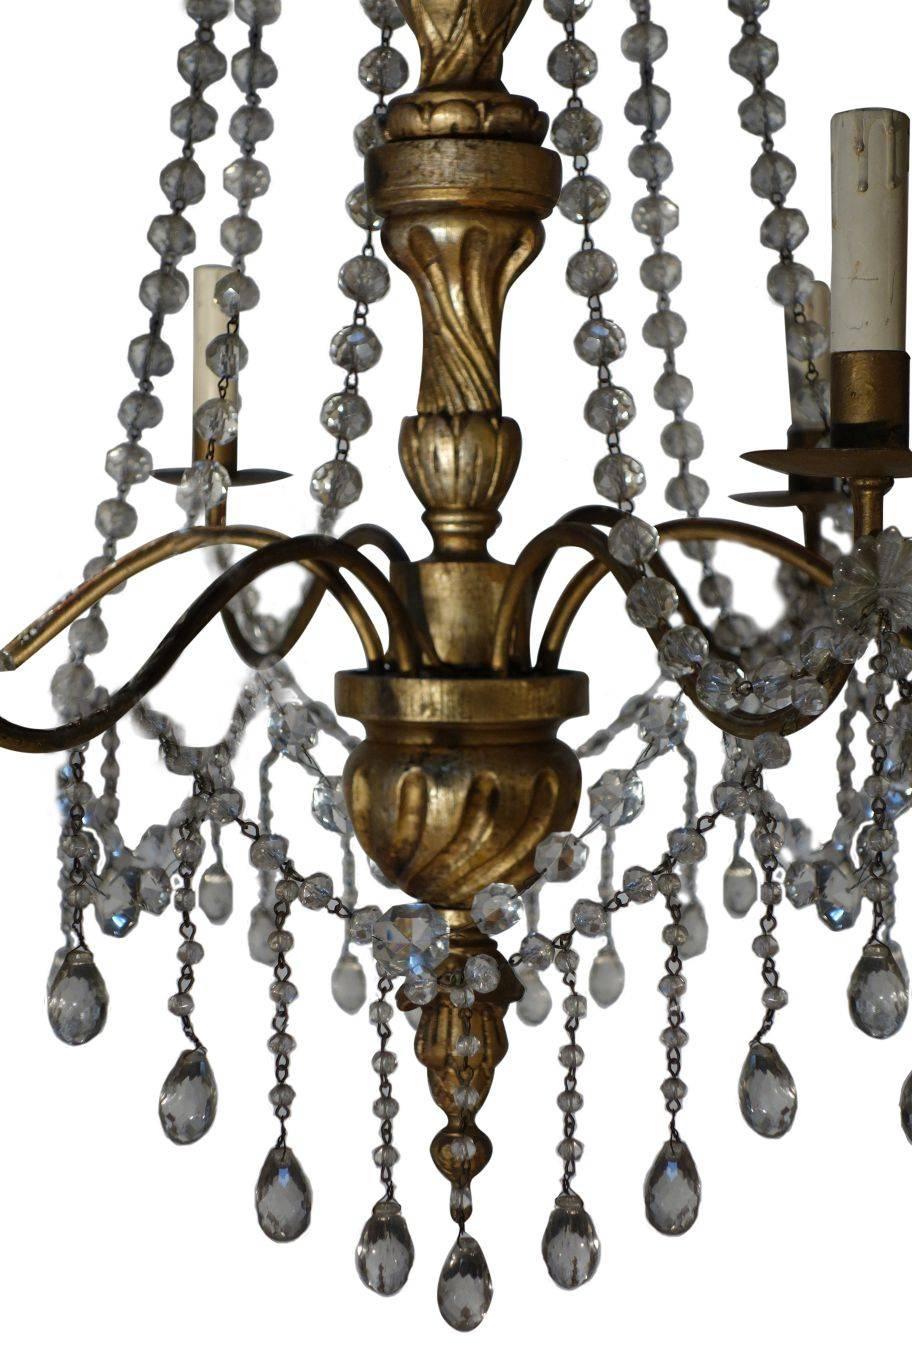 Vintage Italian Gold Painted Genova Style Chandelier with Cut Glass Drops and Strands:
Lovely Italian vintage 6-arm chandelier featuring a balanced presentation of gold painted wood, cut glass and burnished wrought iron. The upper iron tiers and